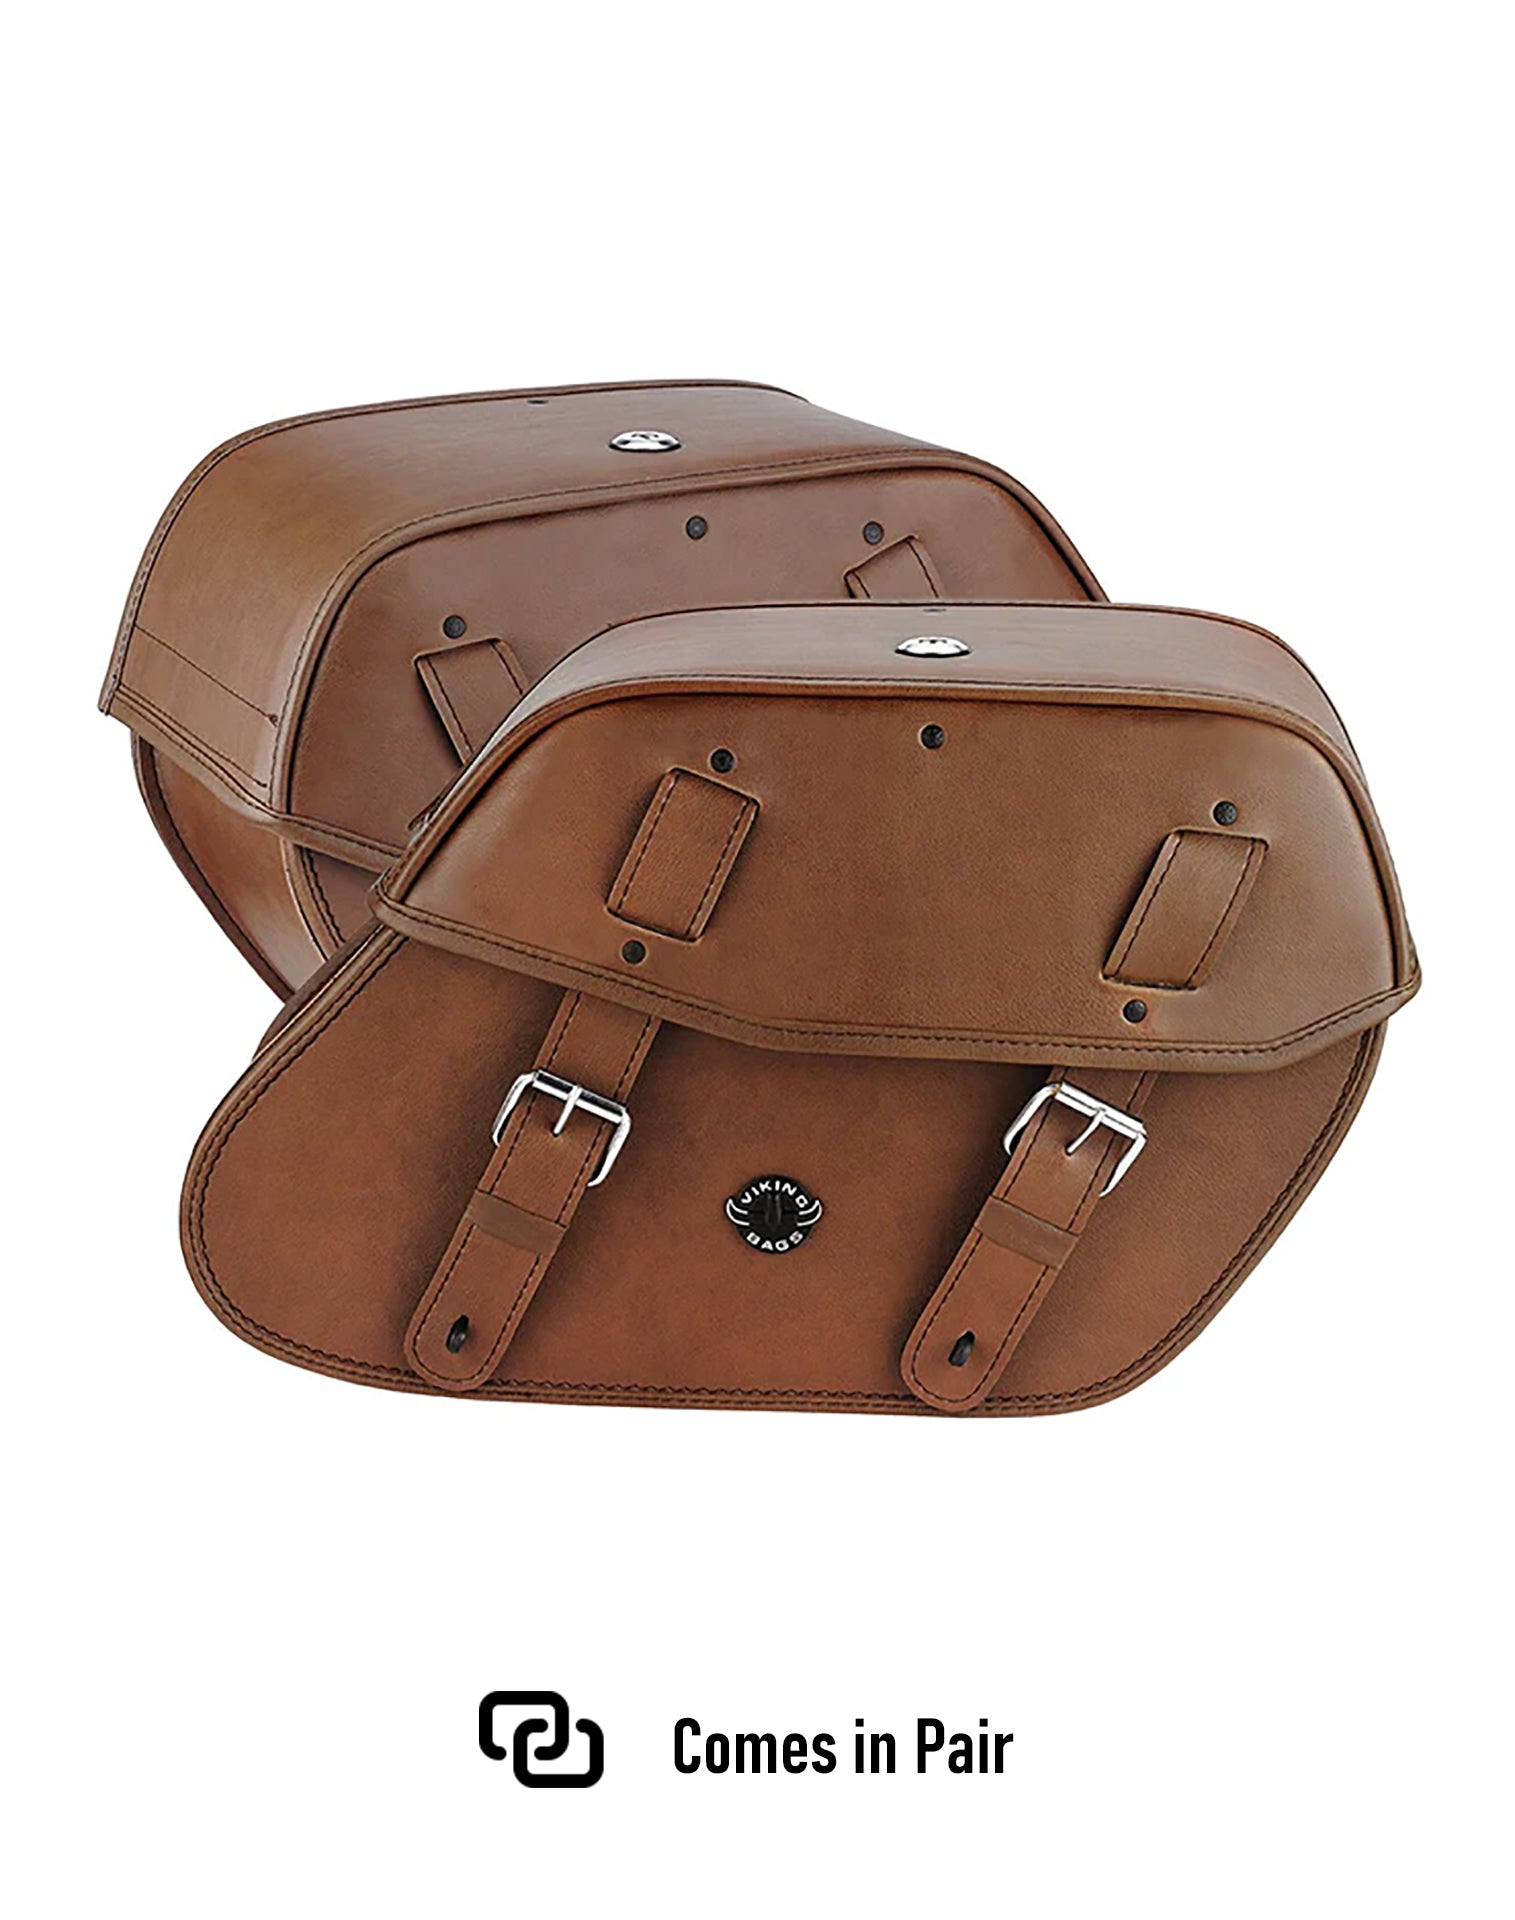 Viking Odin Brown Large Suzuki Boulevard M50 Vz800 Leather Motorcycle Saddlebags Weather Resistant Bags Comes in Pair